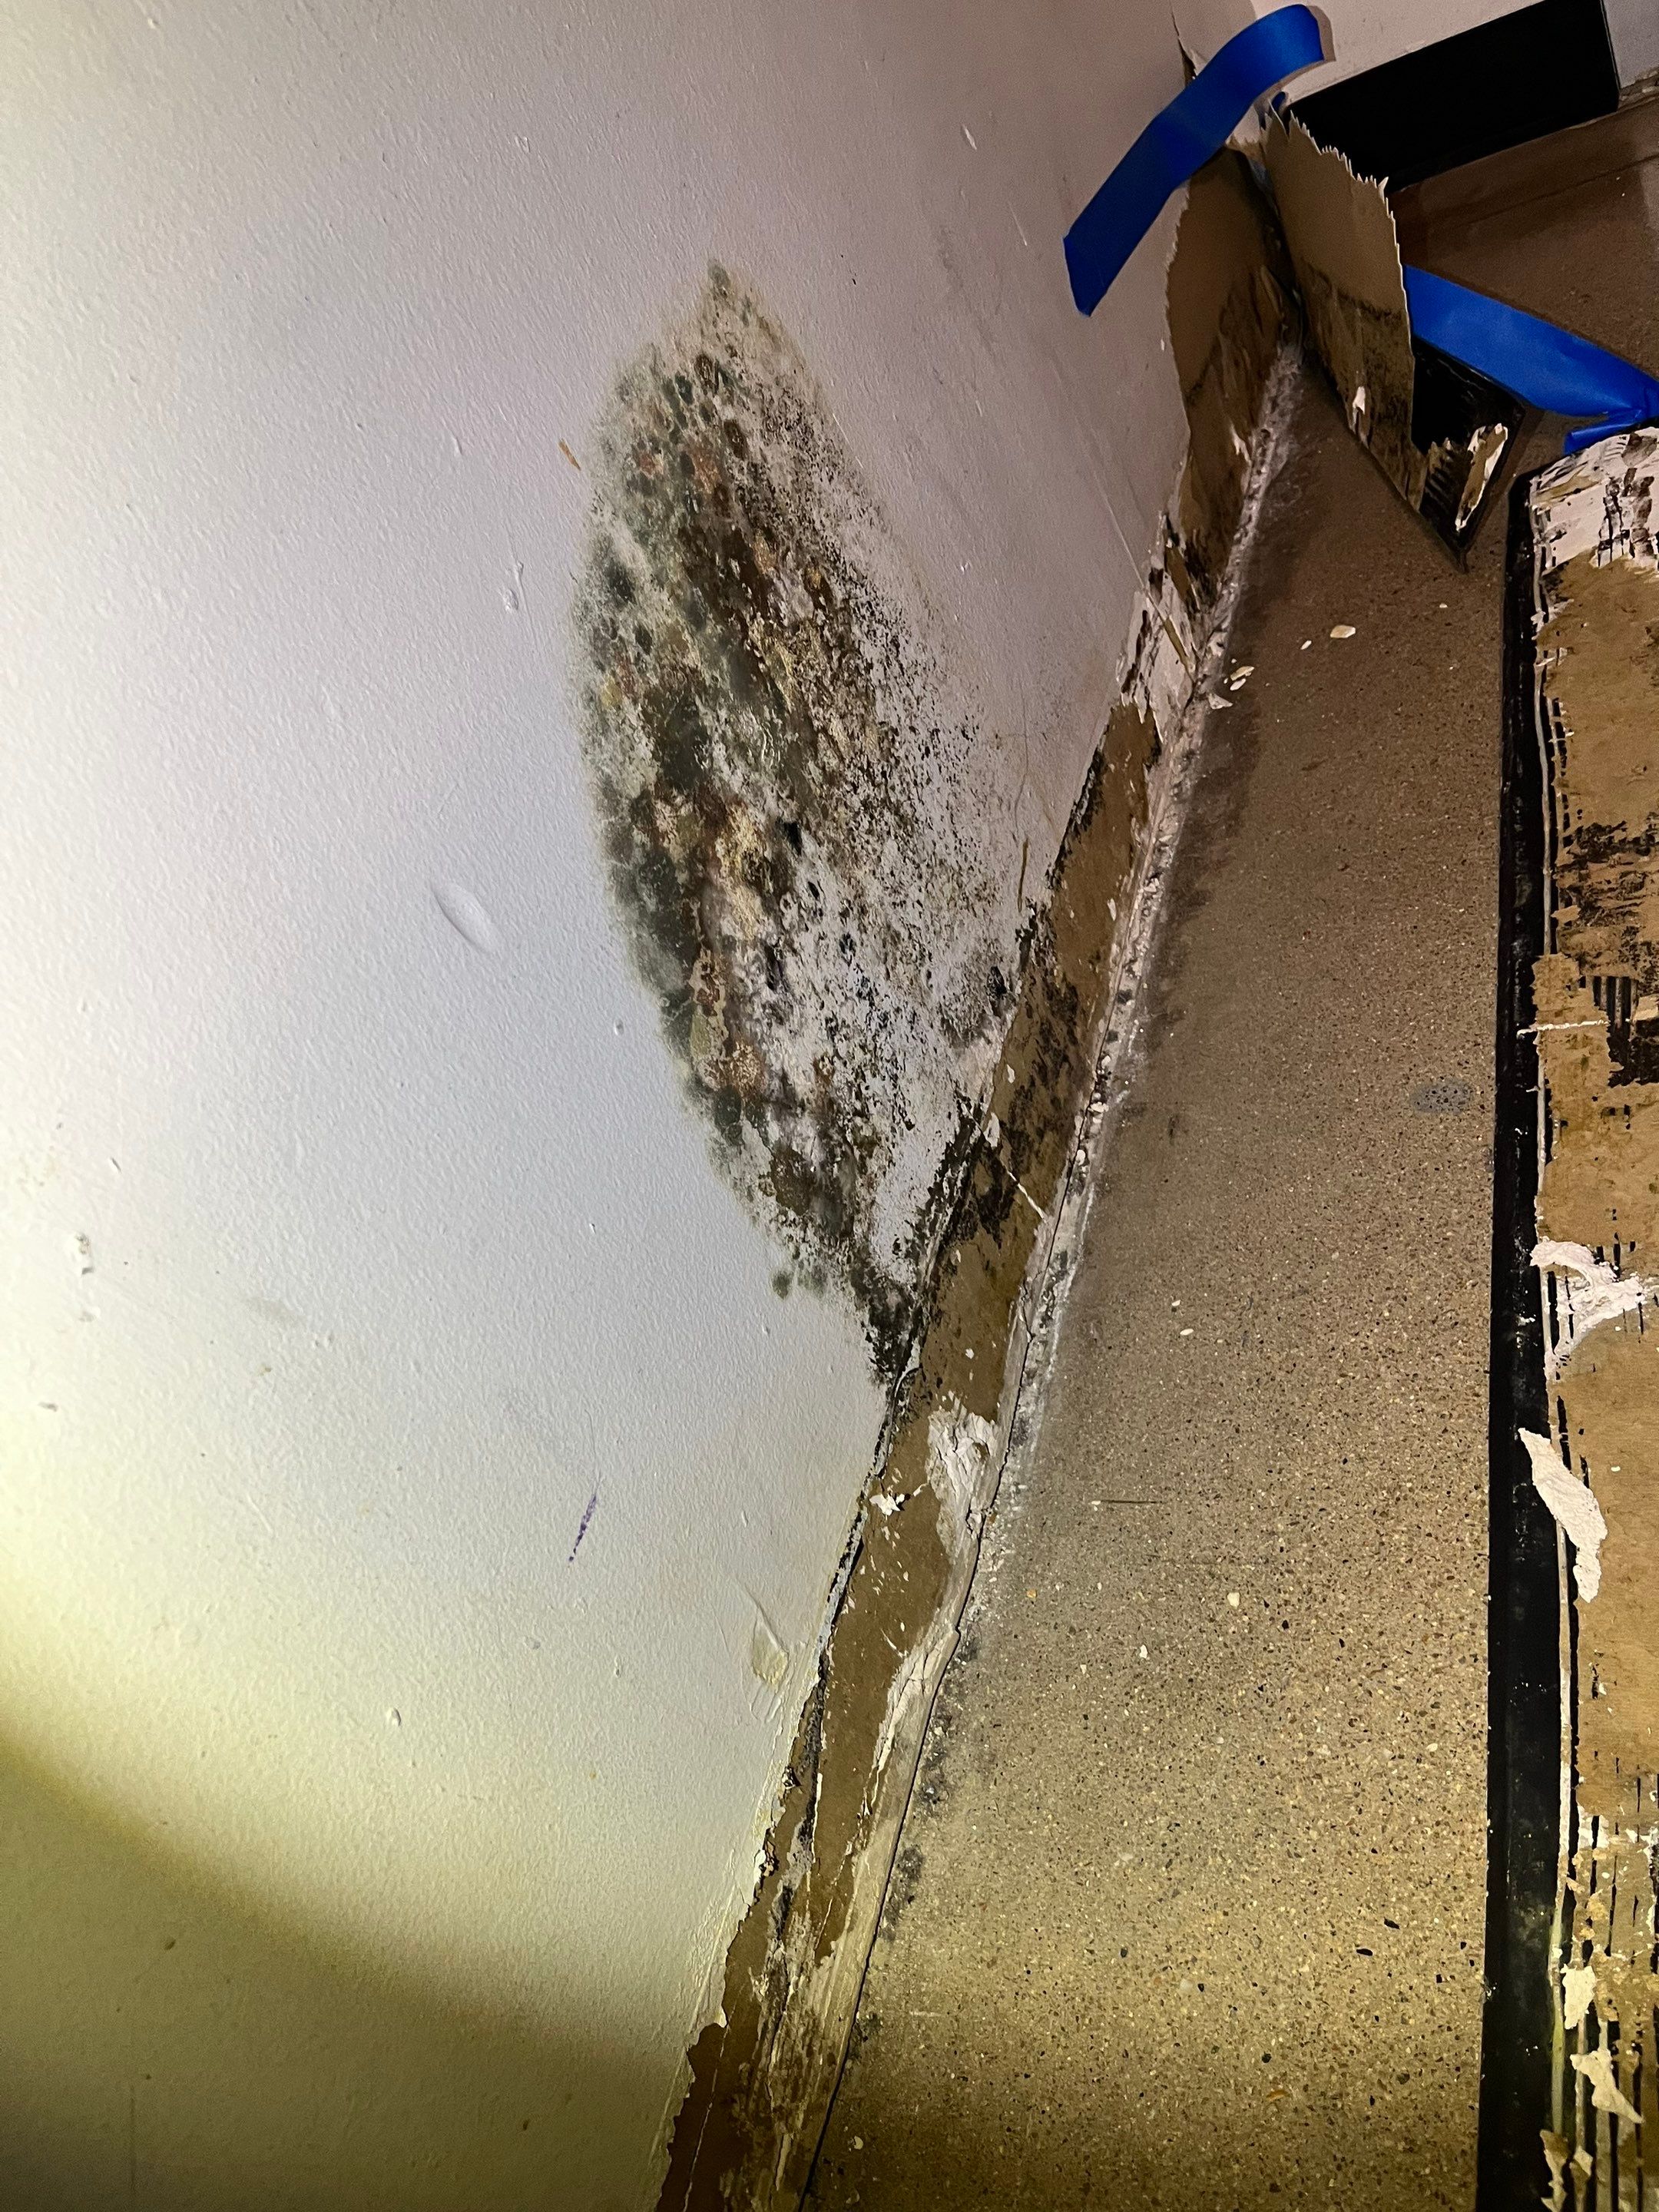 Mold Remediation Specialist - Expert Tips on How to Remediate Black Mold